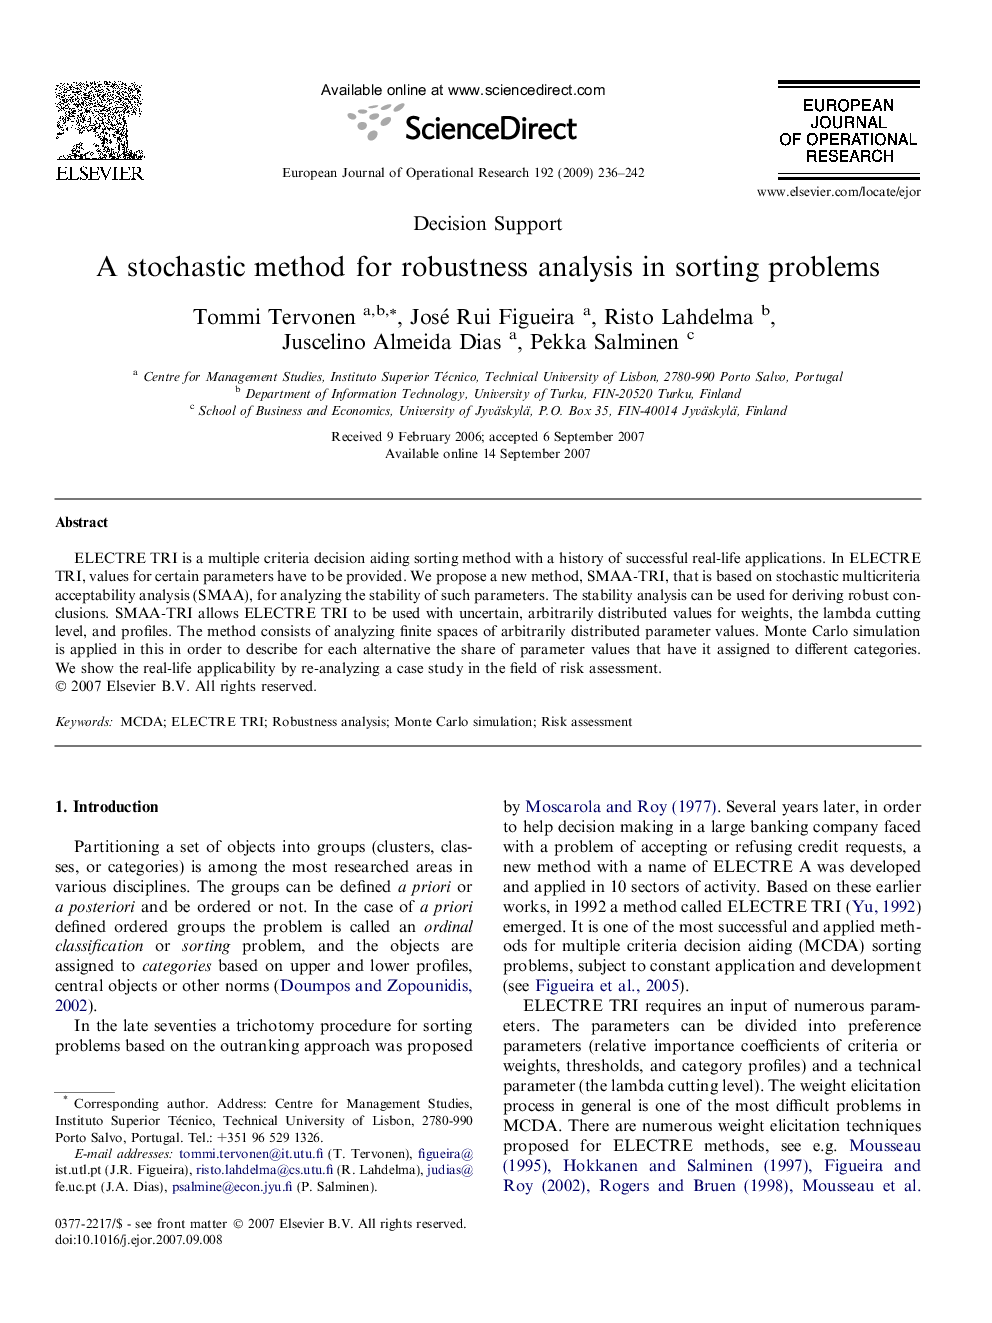 A stochastic method for robustness analysis in sorting problems